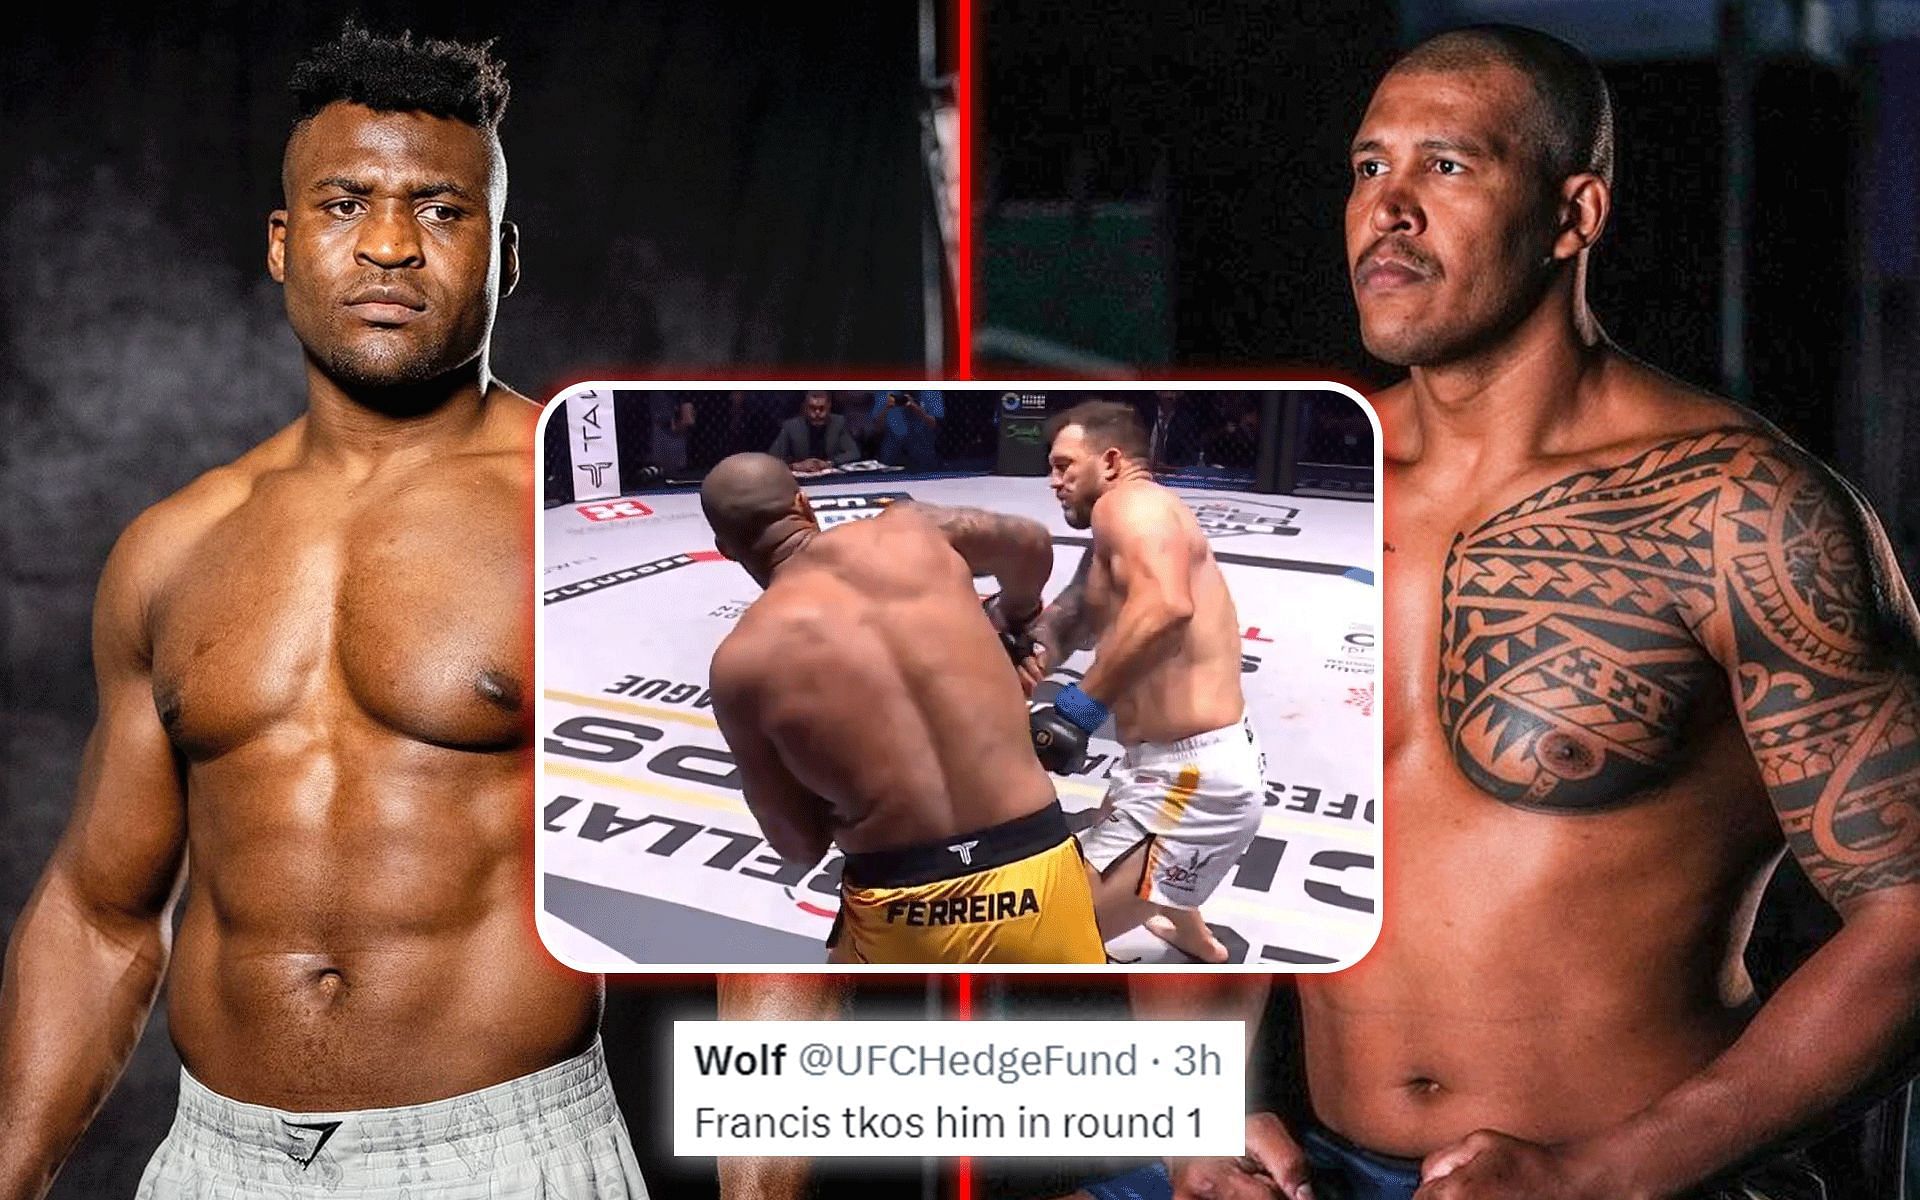 MMA fansdiscuss Francis Ngannou vs. Renan Ferreira [Image credits:@PFLMMA on 